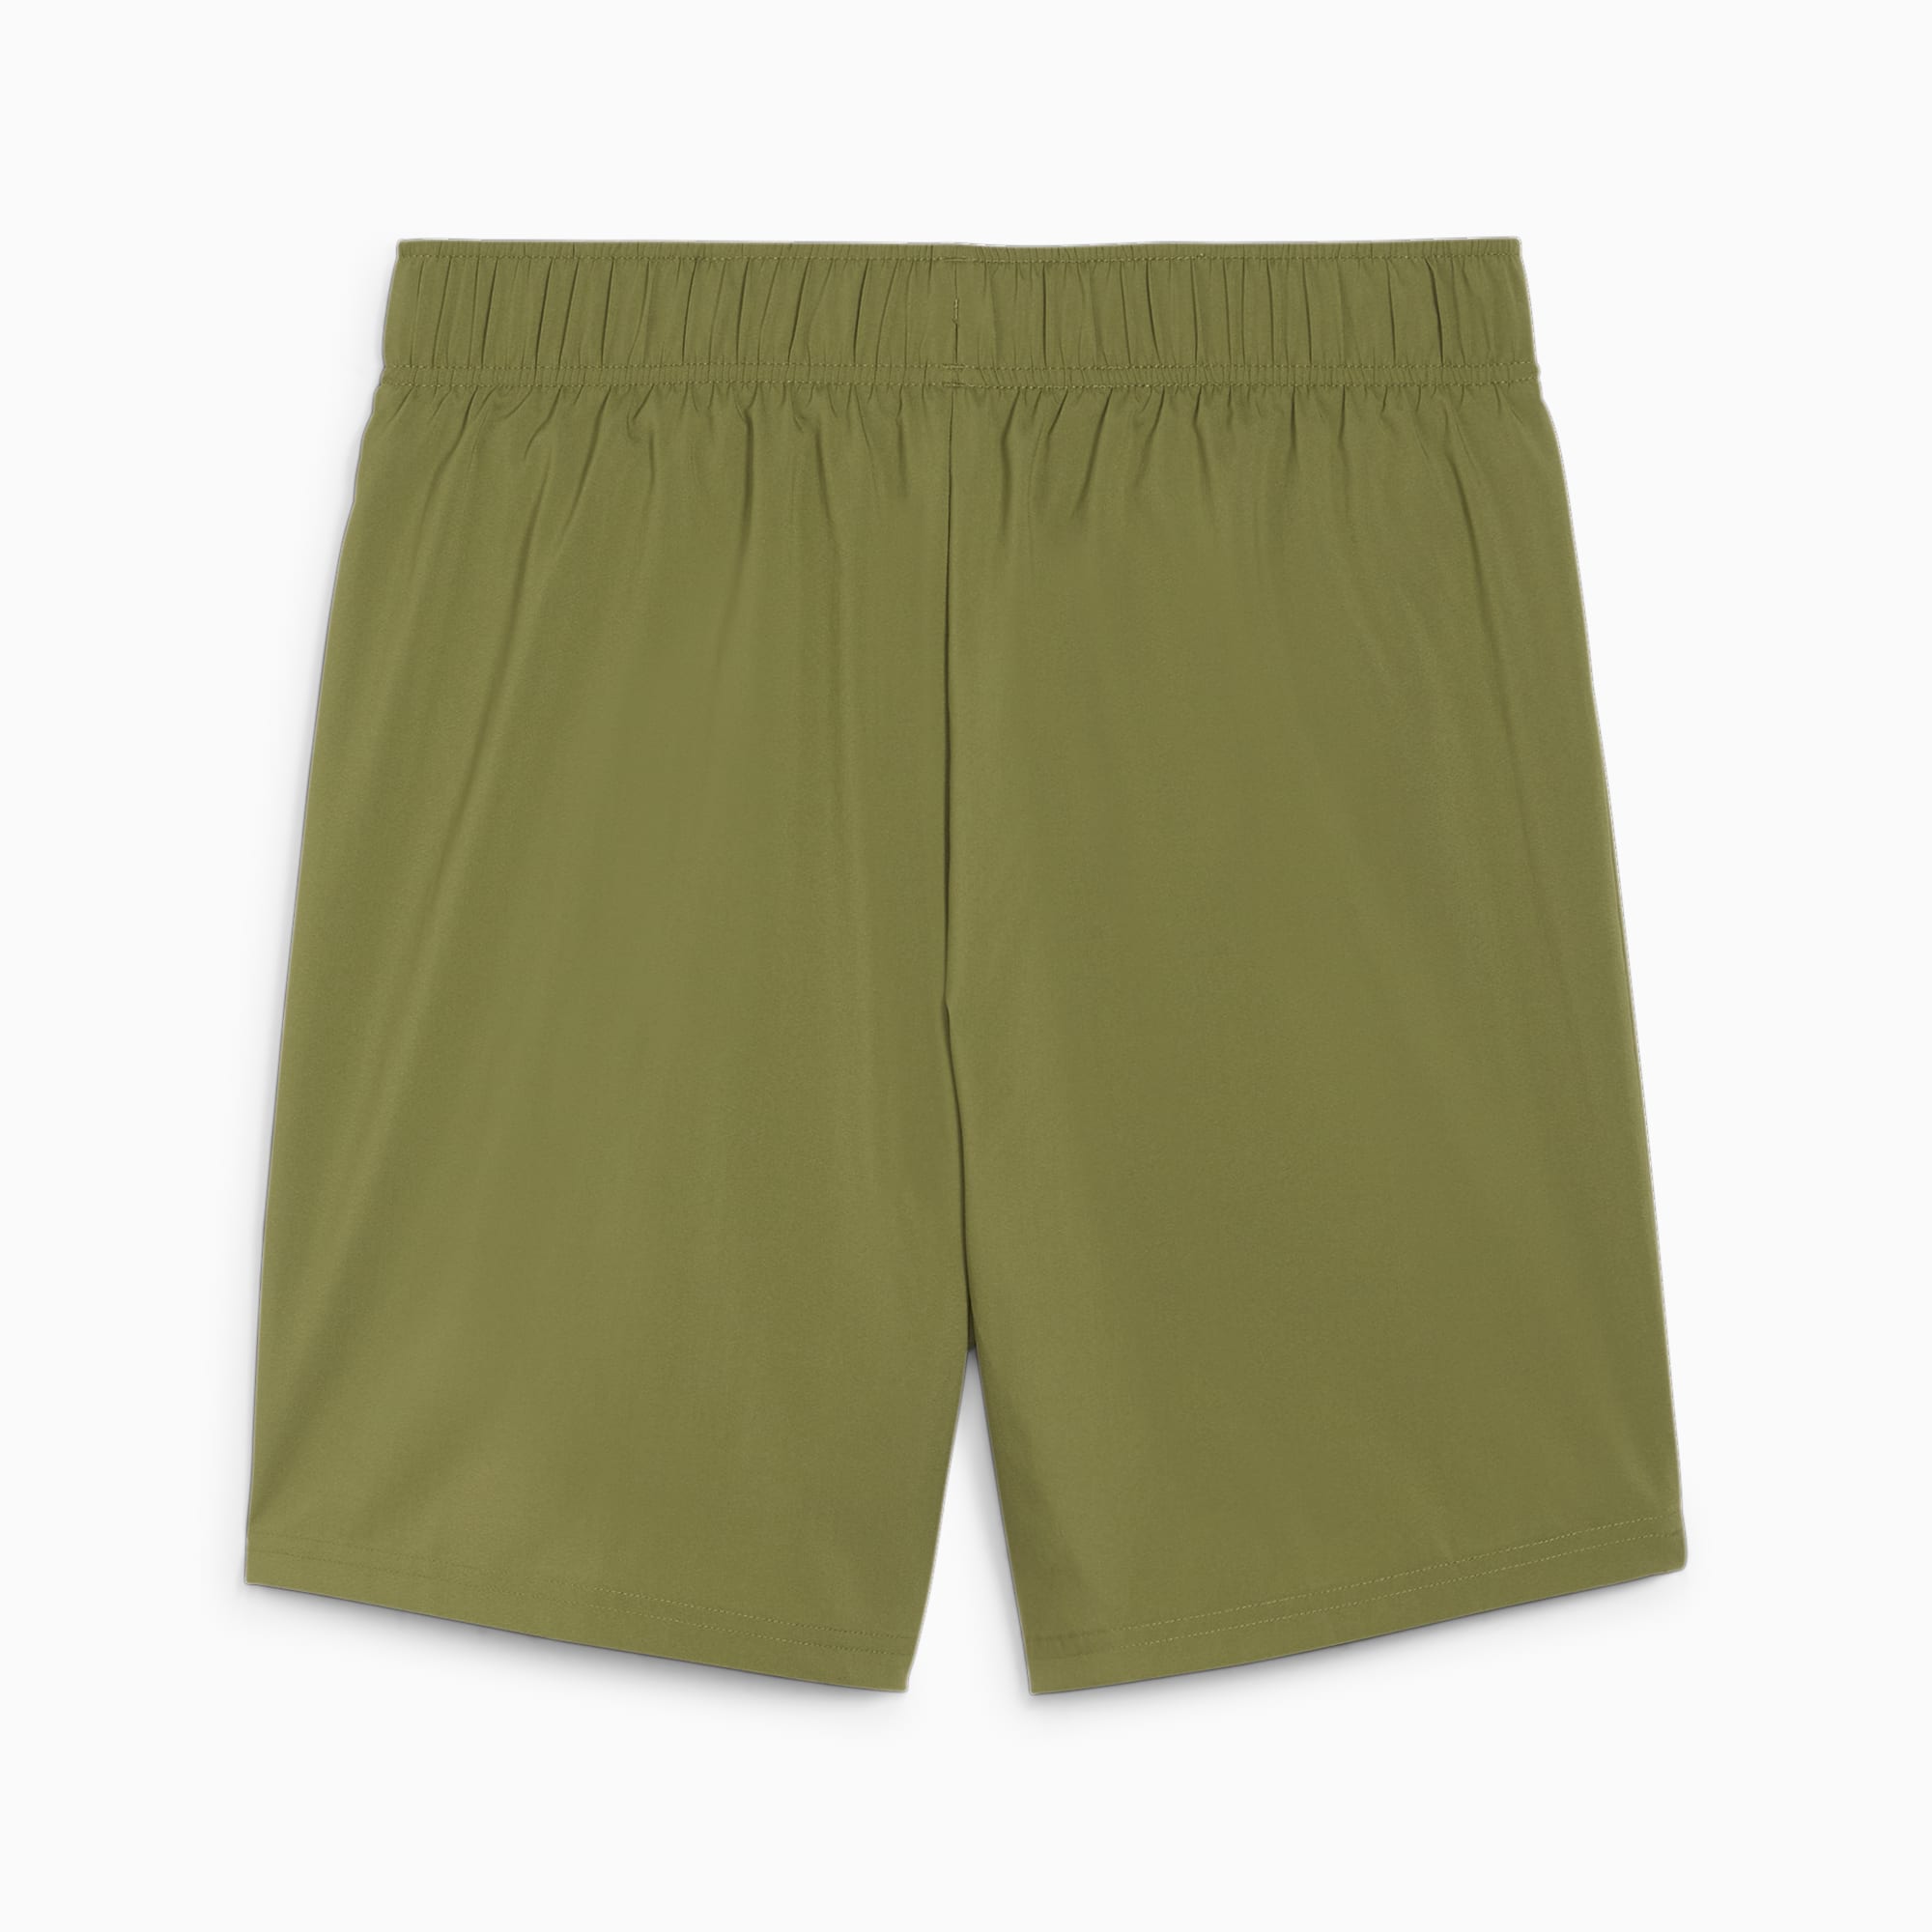 PUMA Favourite 2-in-1 Men's Running Shorts, Olive Green, Size 3XL, Clothing